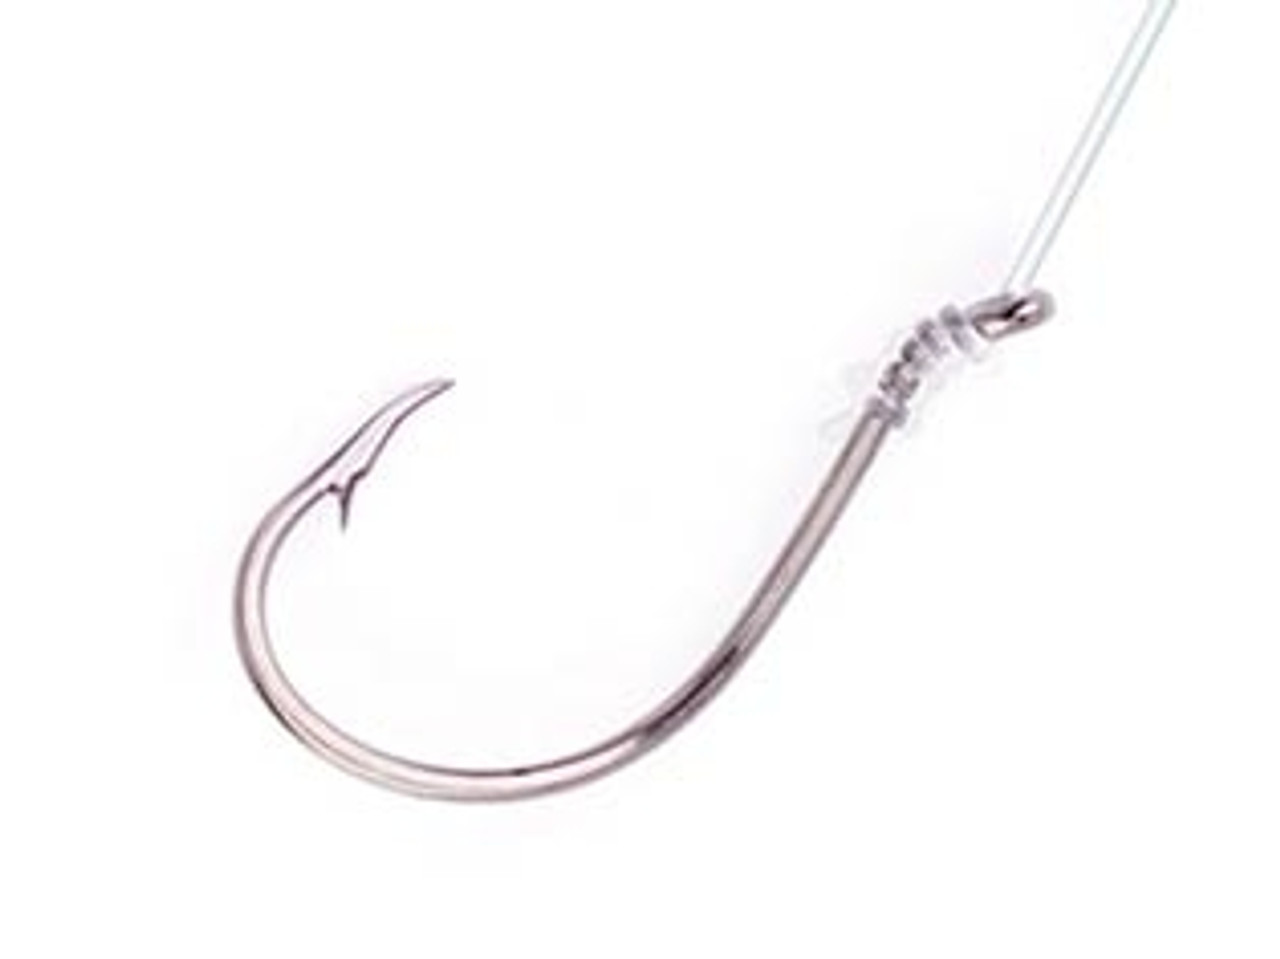 Eagle Claw Snelled Saltwater Octopus Hook - 9211